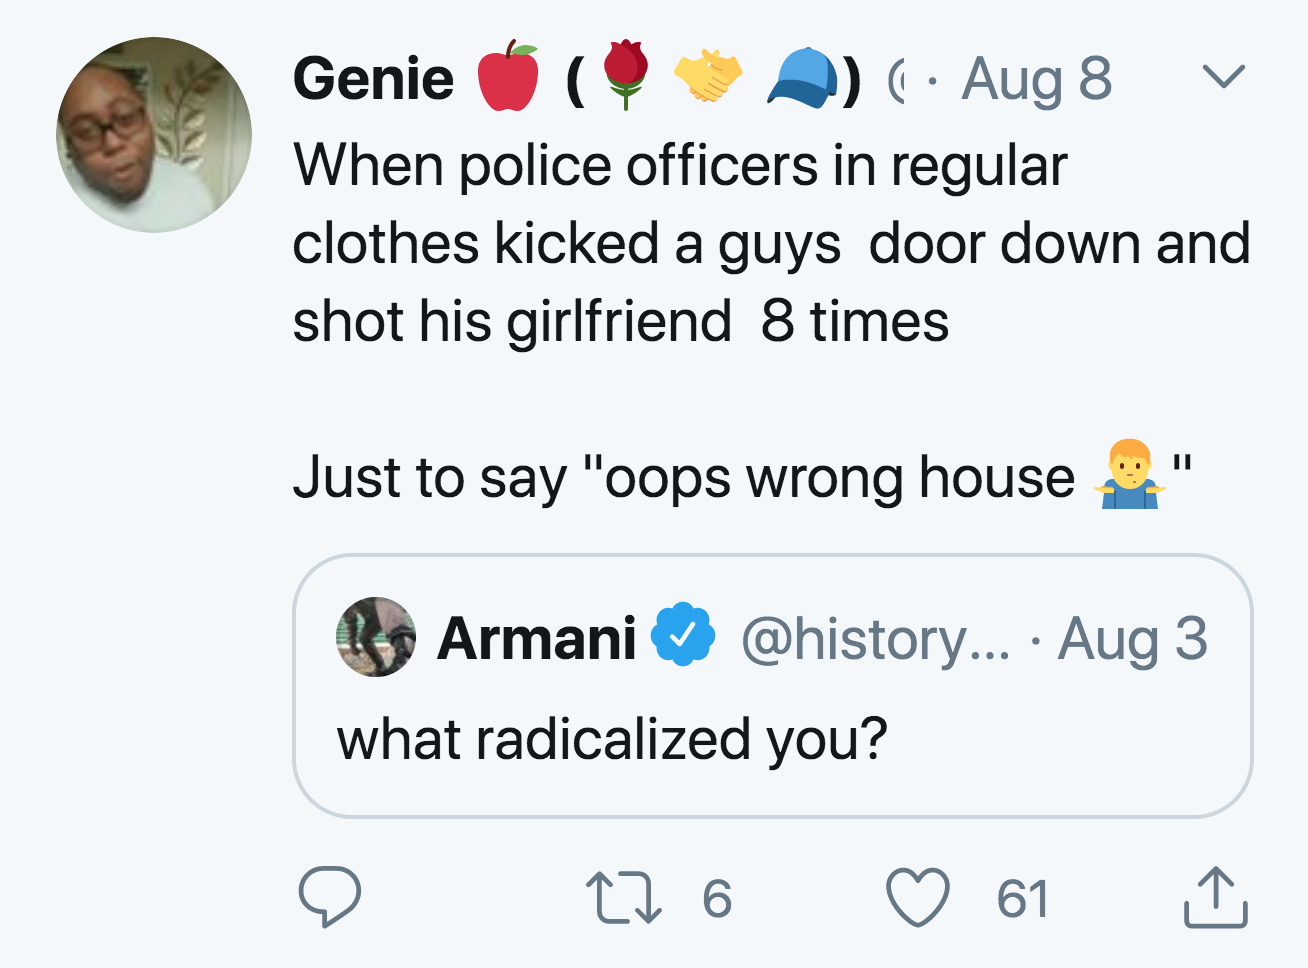 angle - L Genie Aug 8 When police officers in regular clothes kicked a guys door down and shot his girlfriend 8 times Just to say "oops wrong house Armani ... Aug 3 what radicalized you? 22 6 61 1